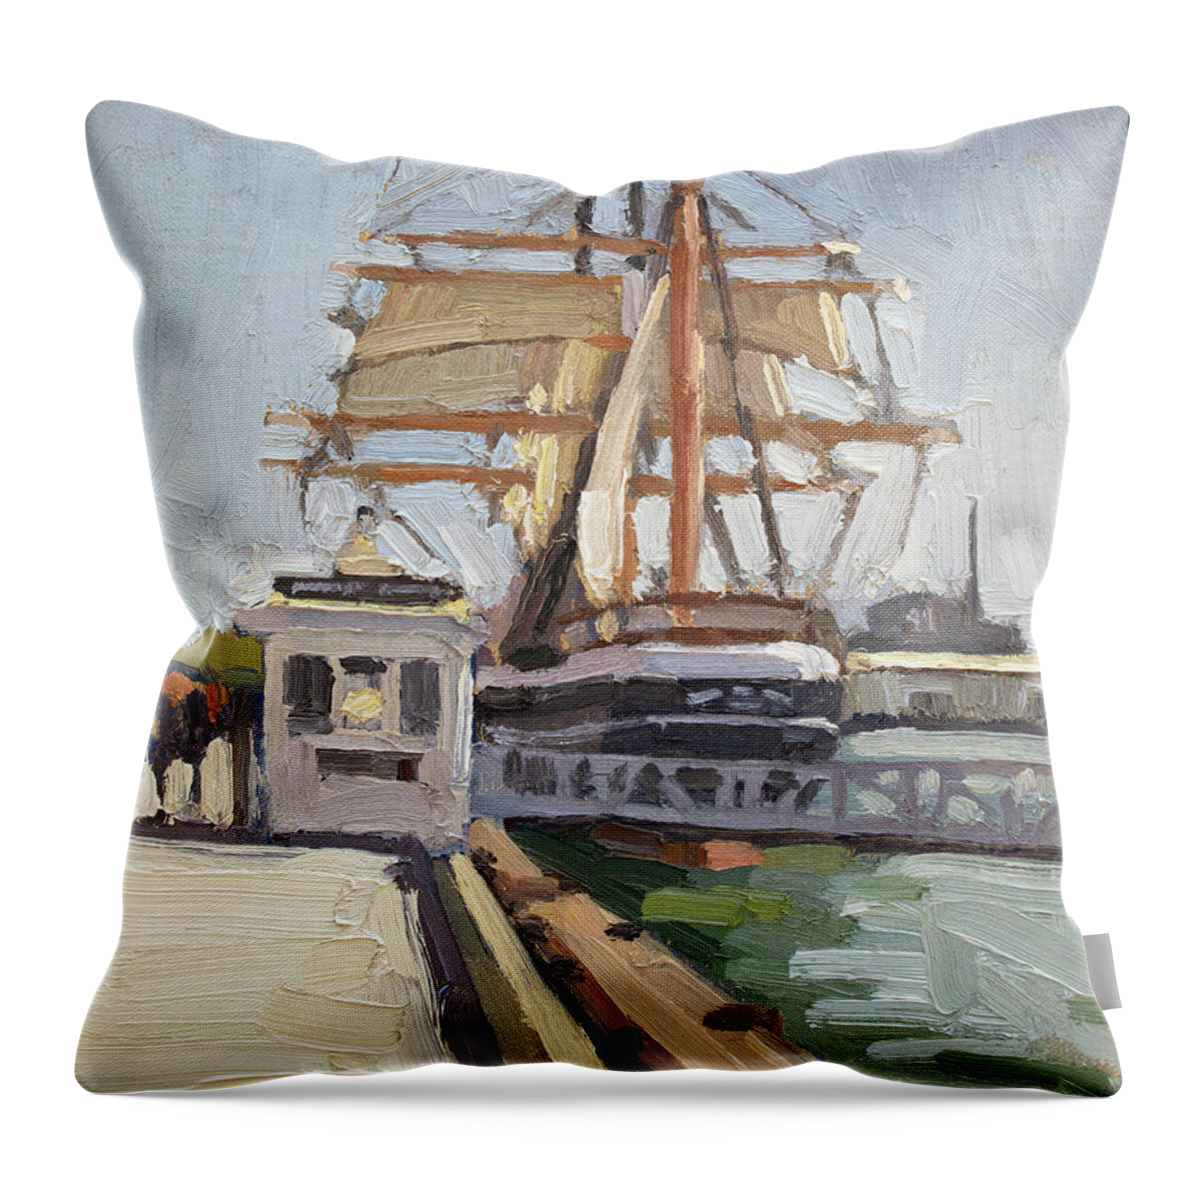 Star Of India Throw Pillow featuring the painting Star of India - Embarcadero, San Diego, California by Paul Strahm